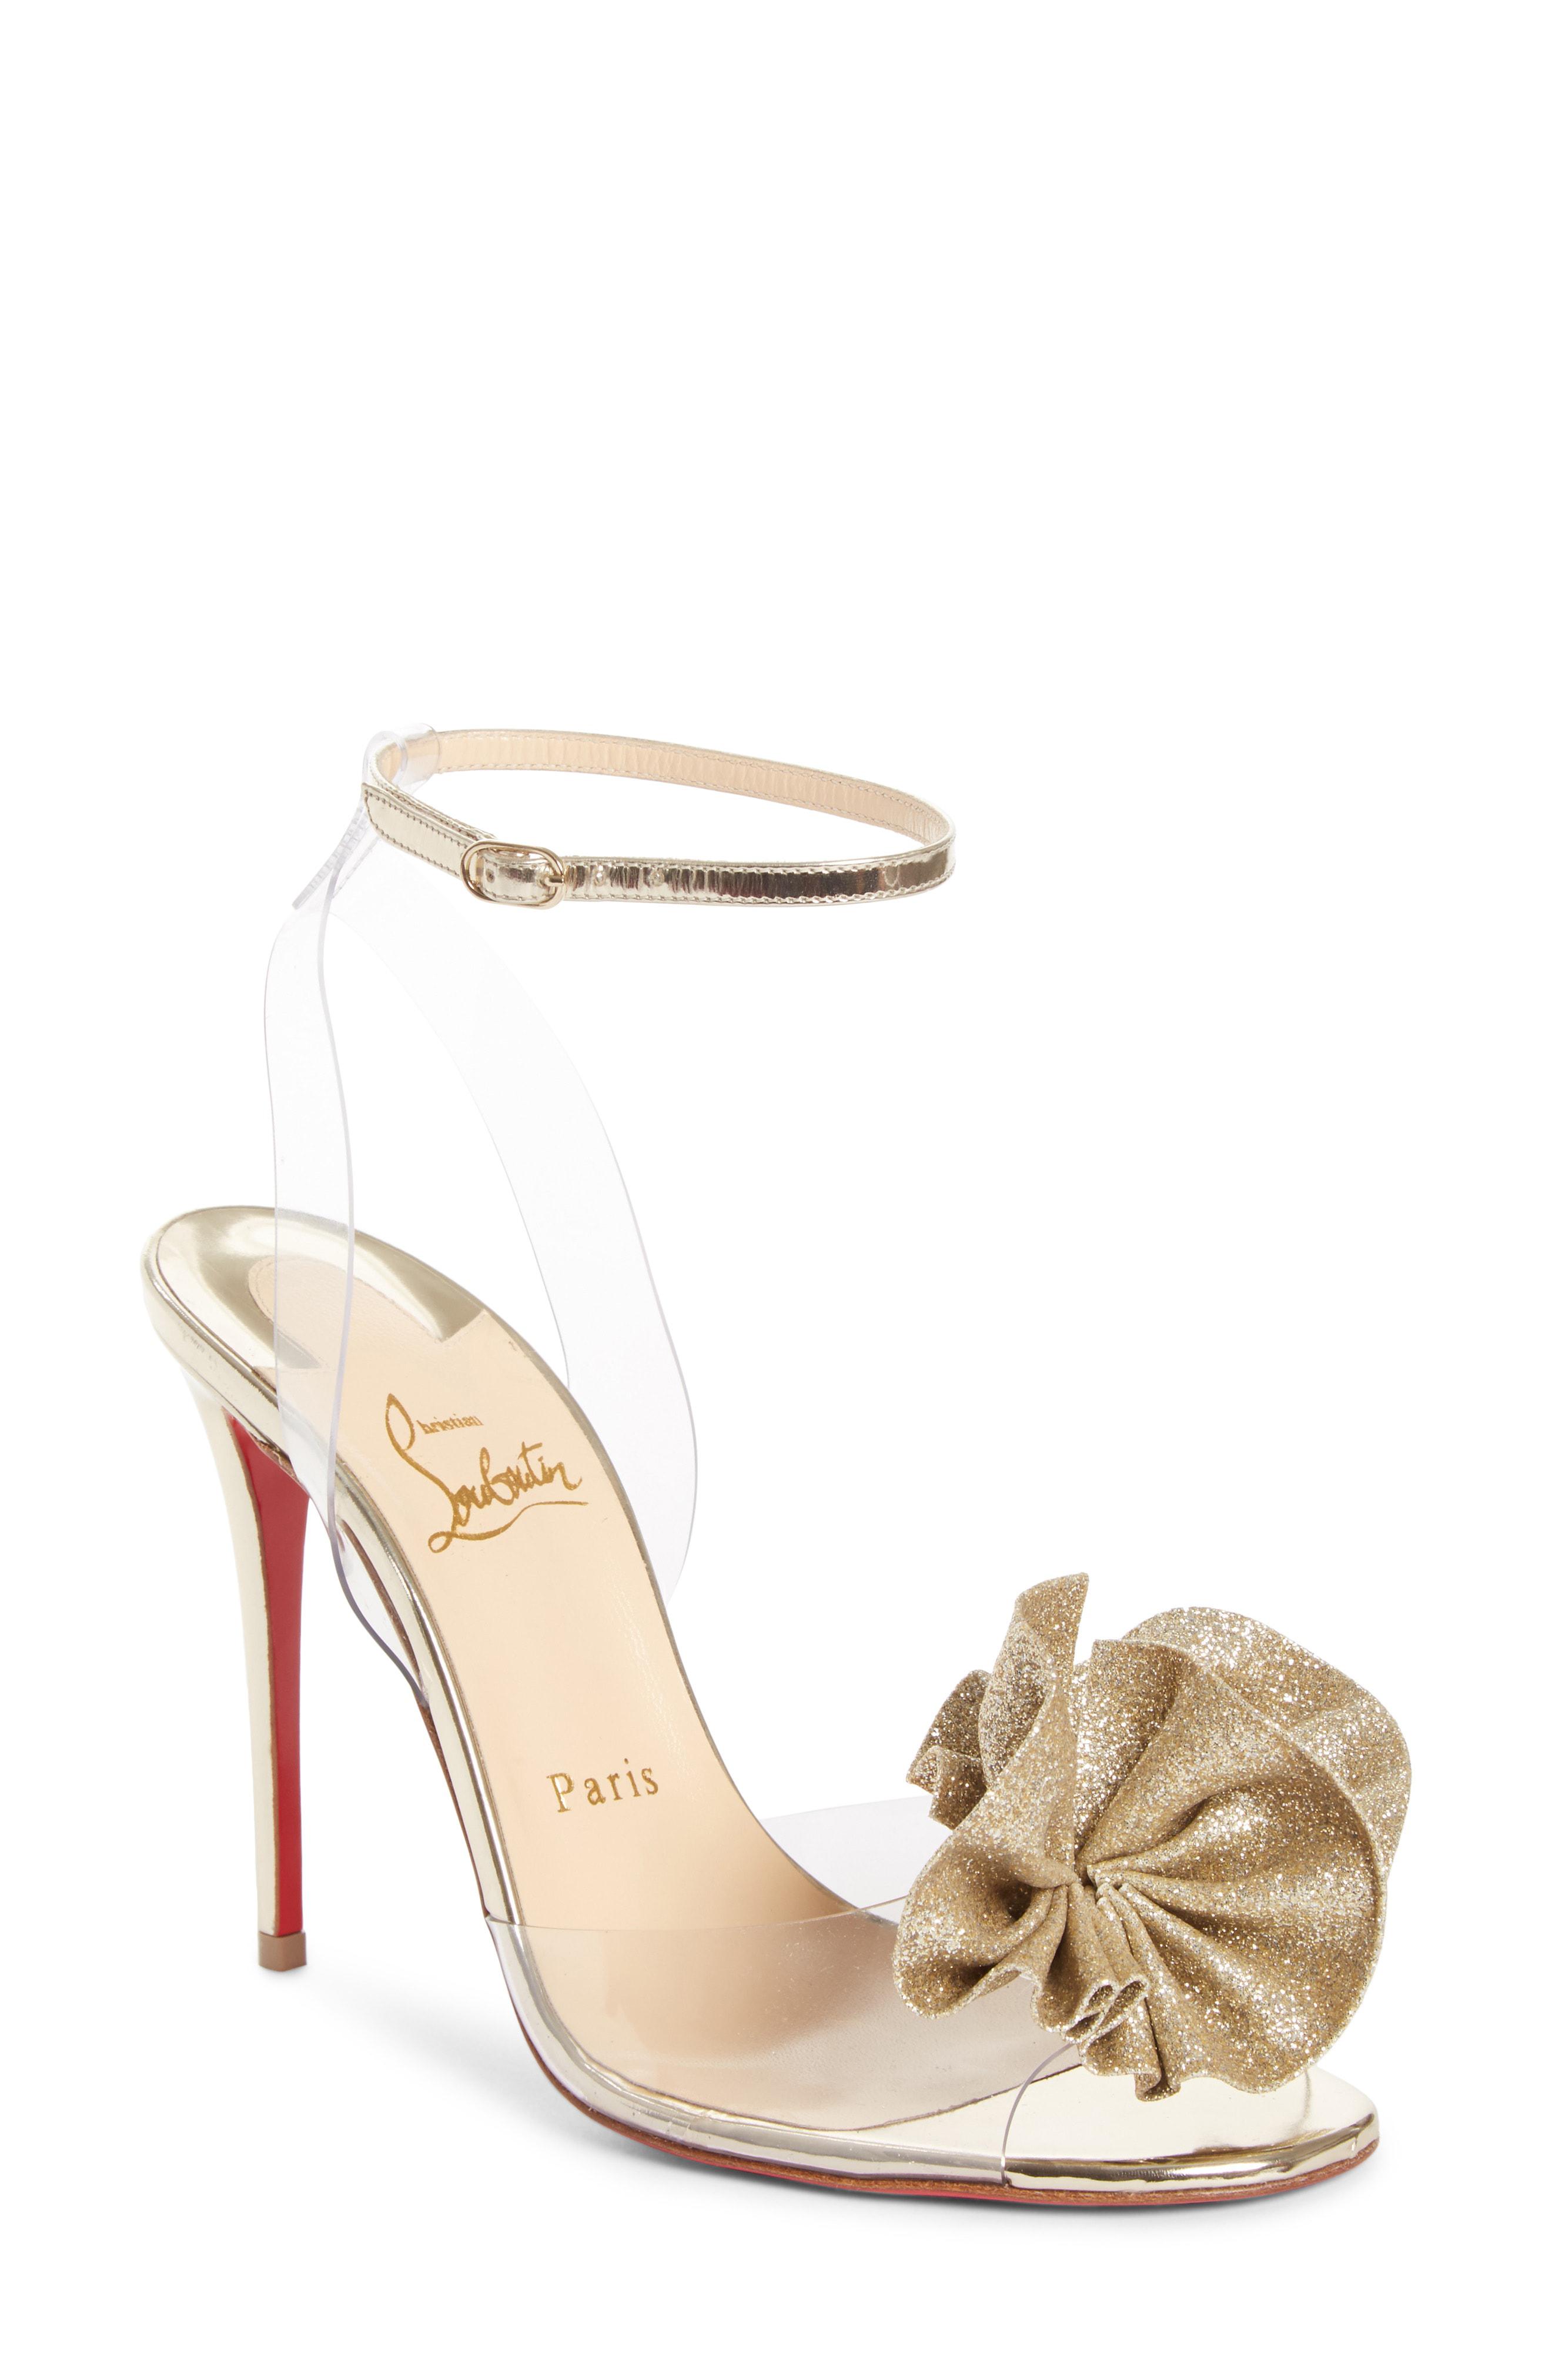 louboutin clear sandals